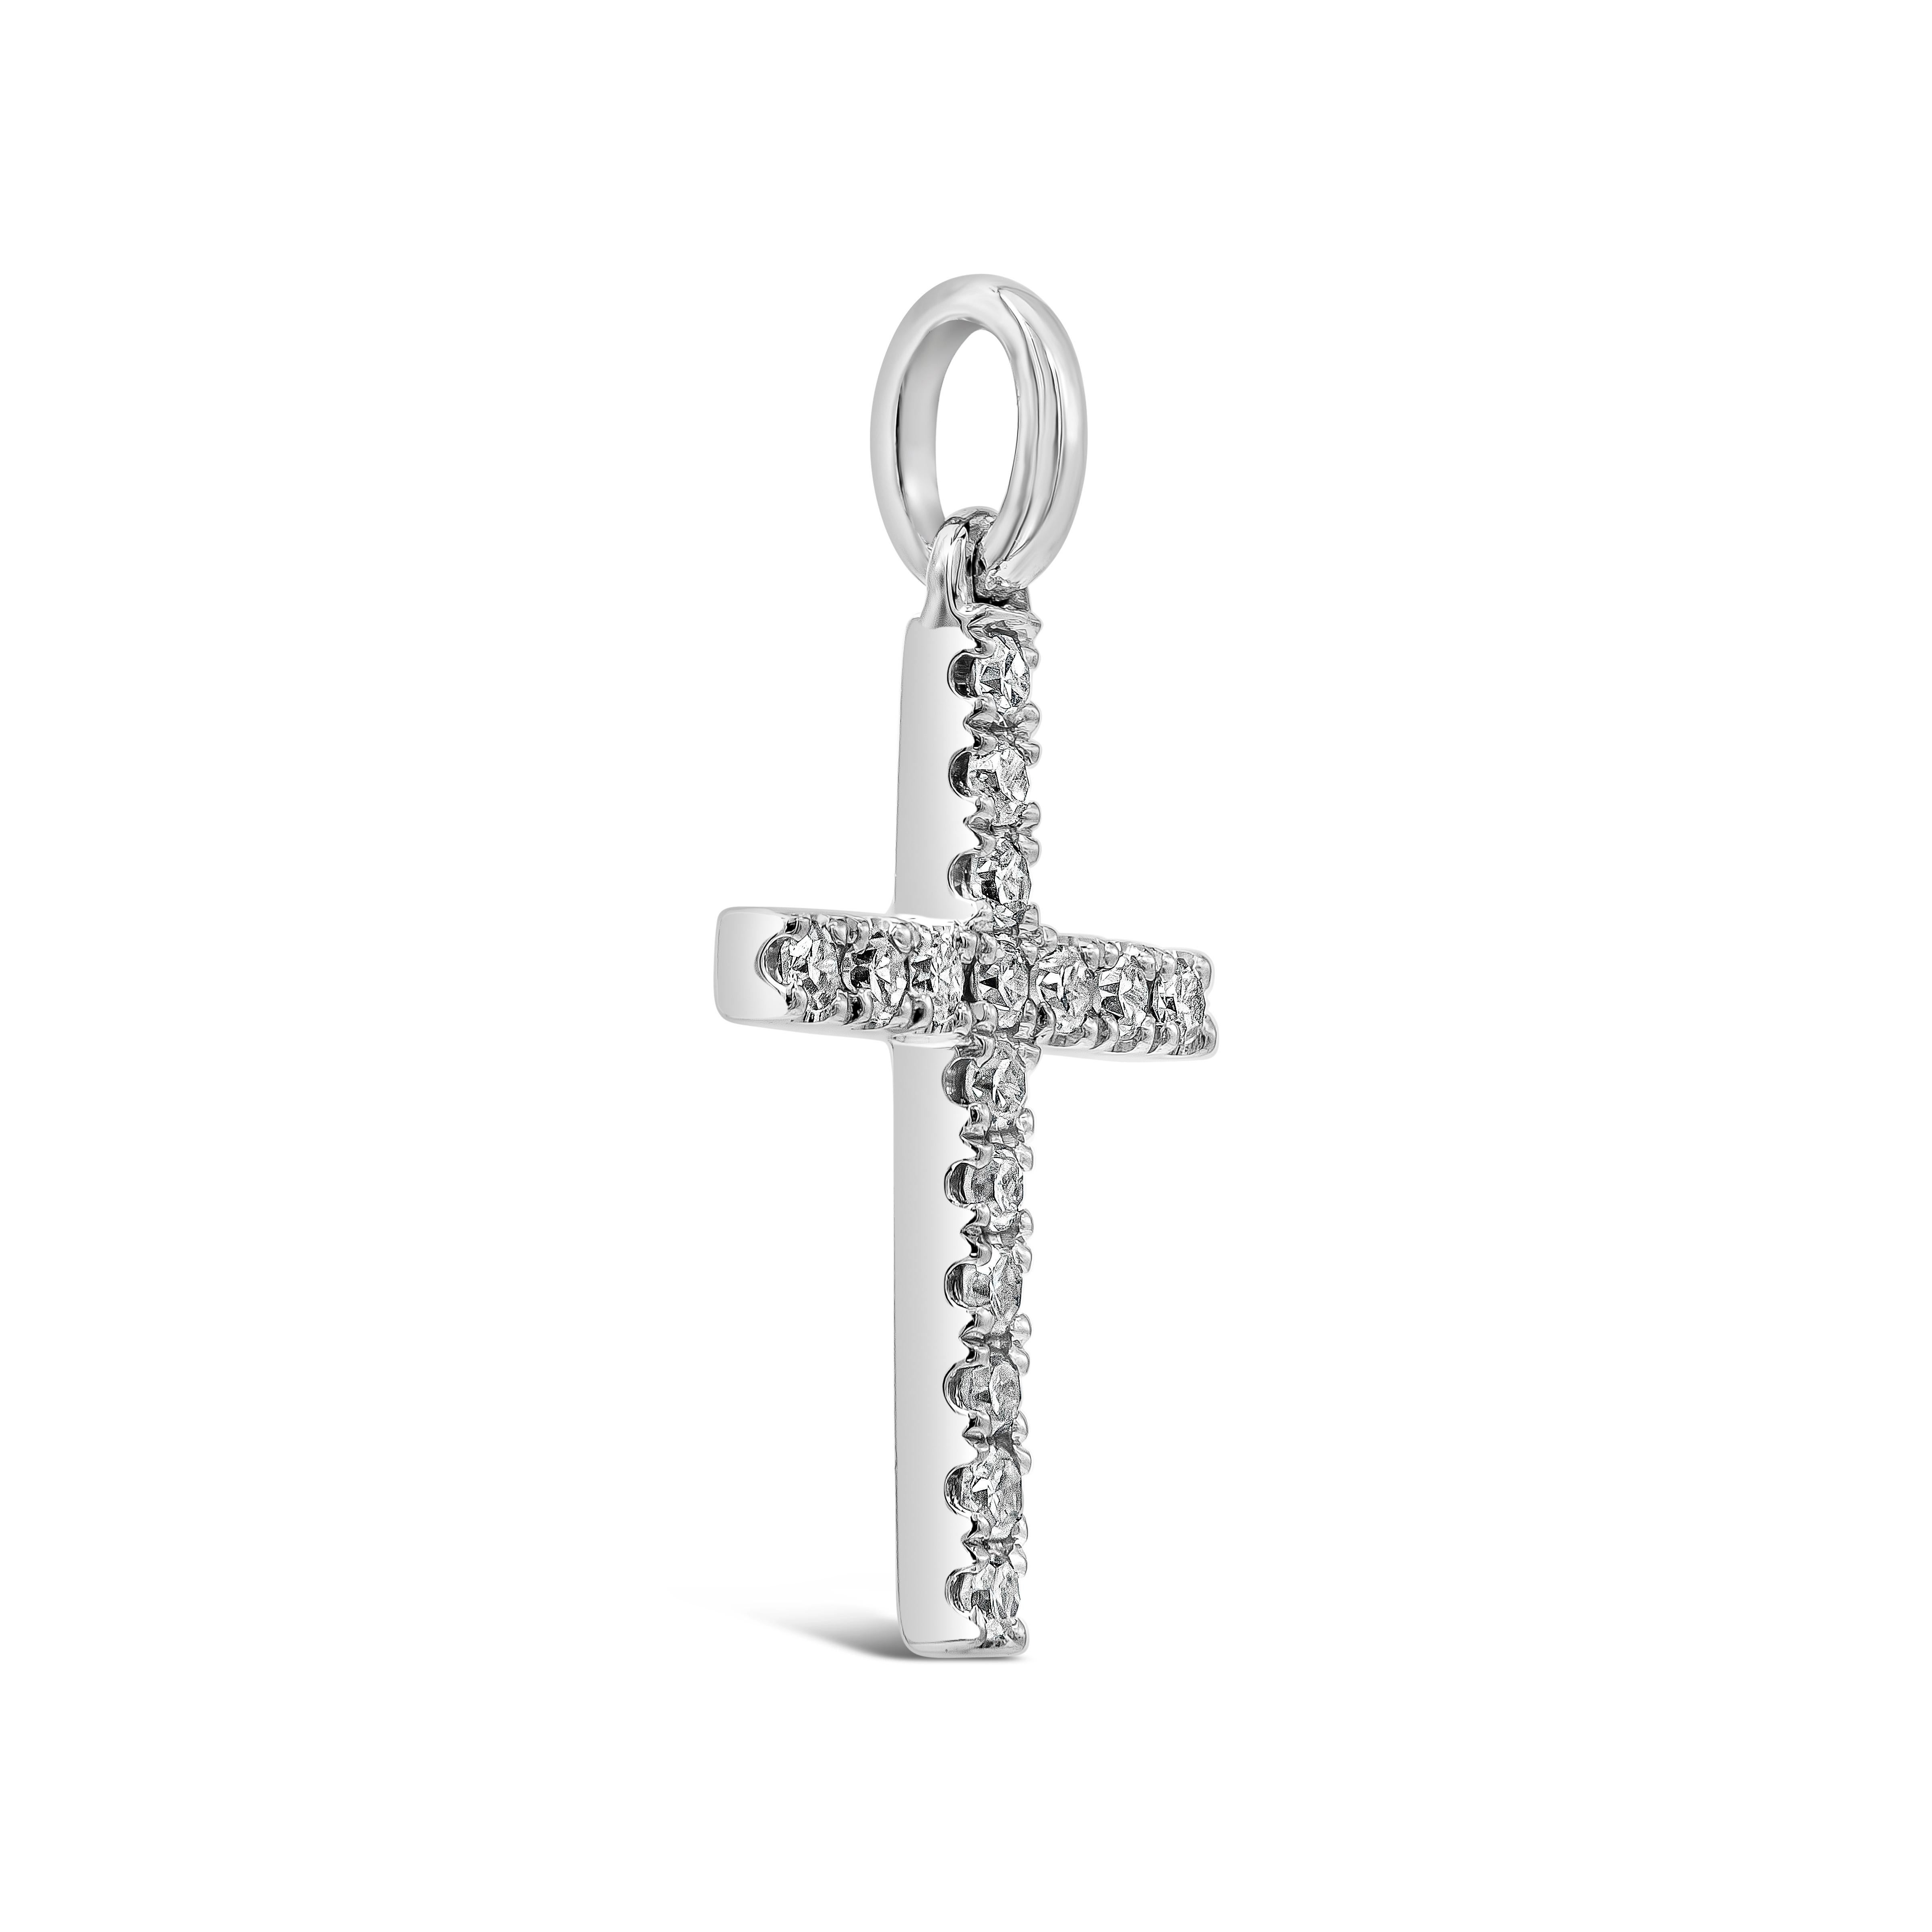 A small pendant necklace showcasing 0.08 carats total of single cut diamonds, set in a religious cross design. Made in 18k white gold. Suspended in an 16 inch white gold chain.

Style available in different price ranges. Prices are based on your